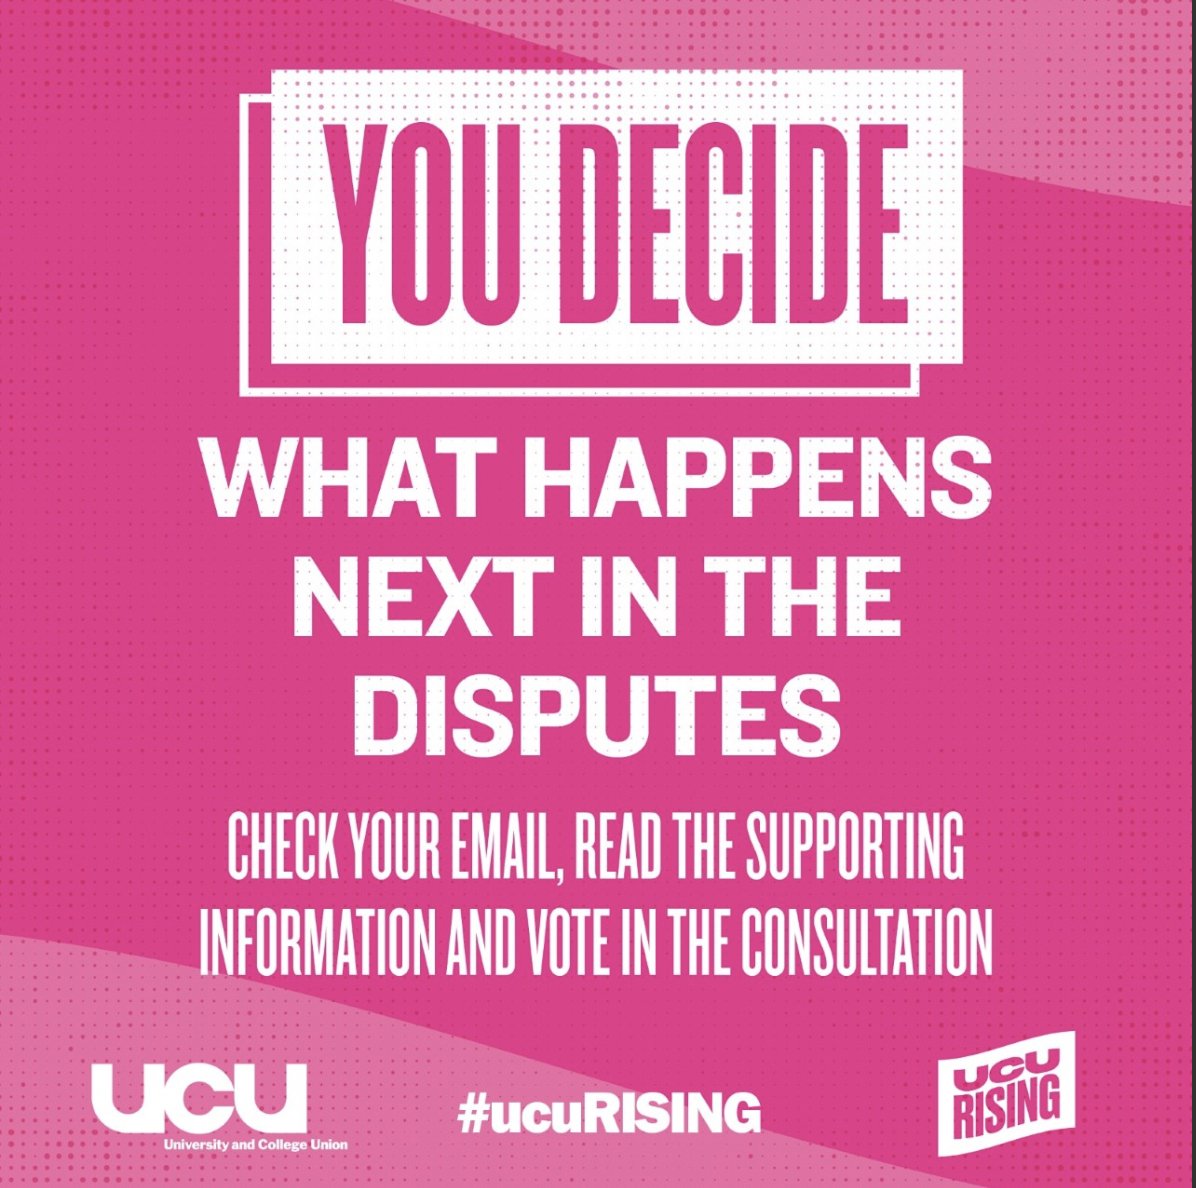 The consultations on pensions and pay & conditions have now been open 24 hours  If you haven't yet voted, please check your email and have your say  EVERY member's vote counts  #ucuRISING